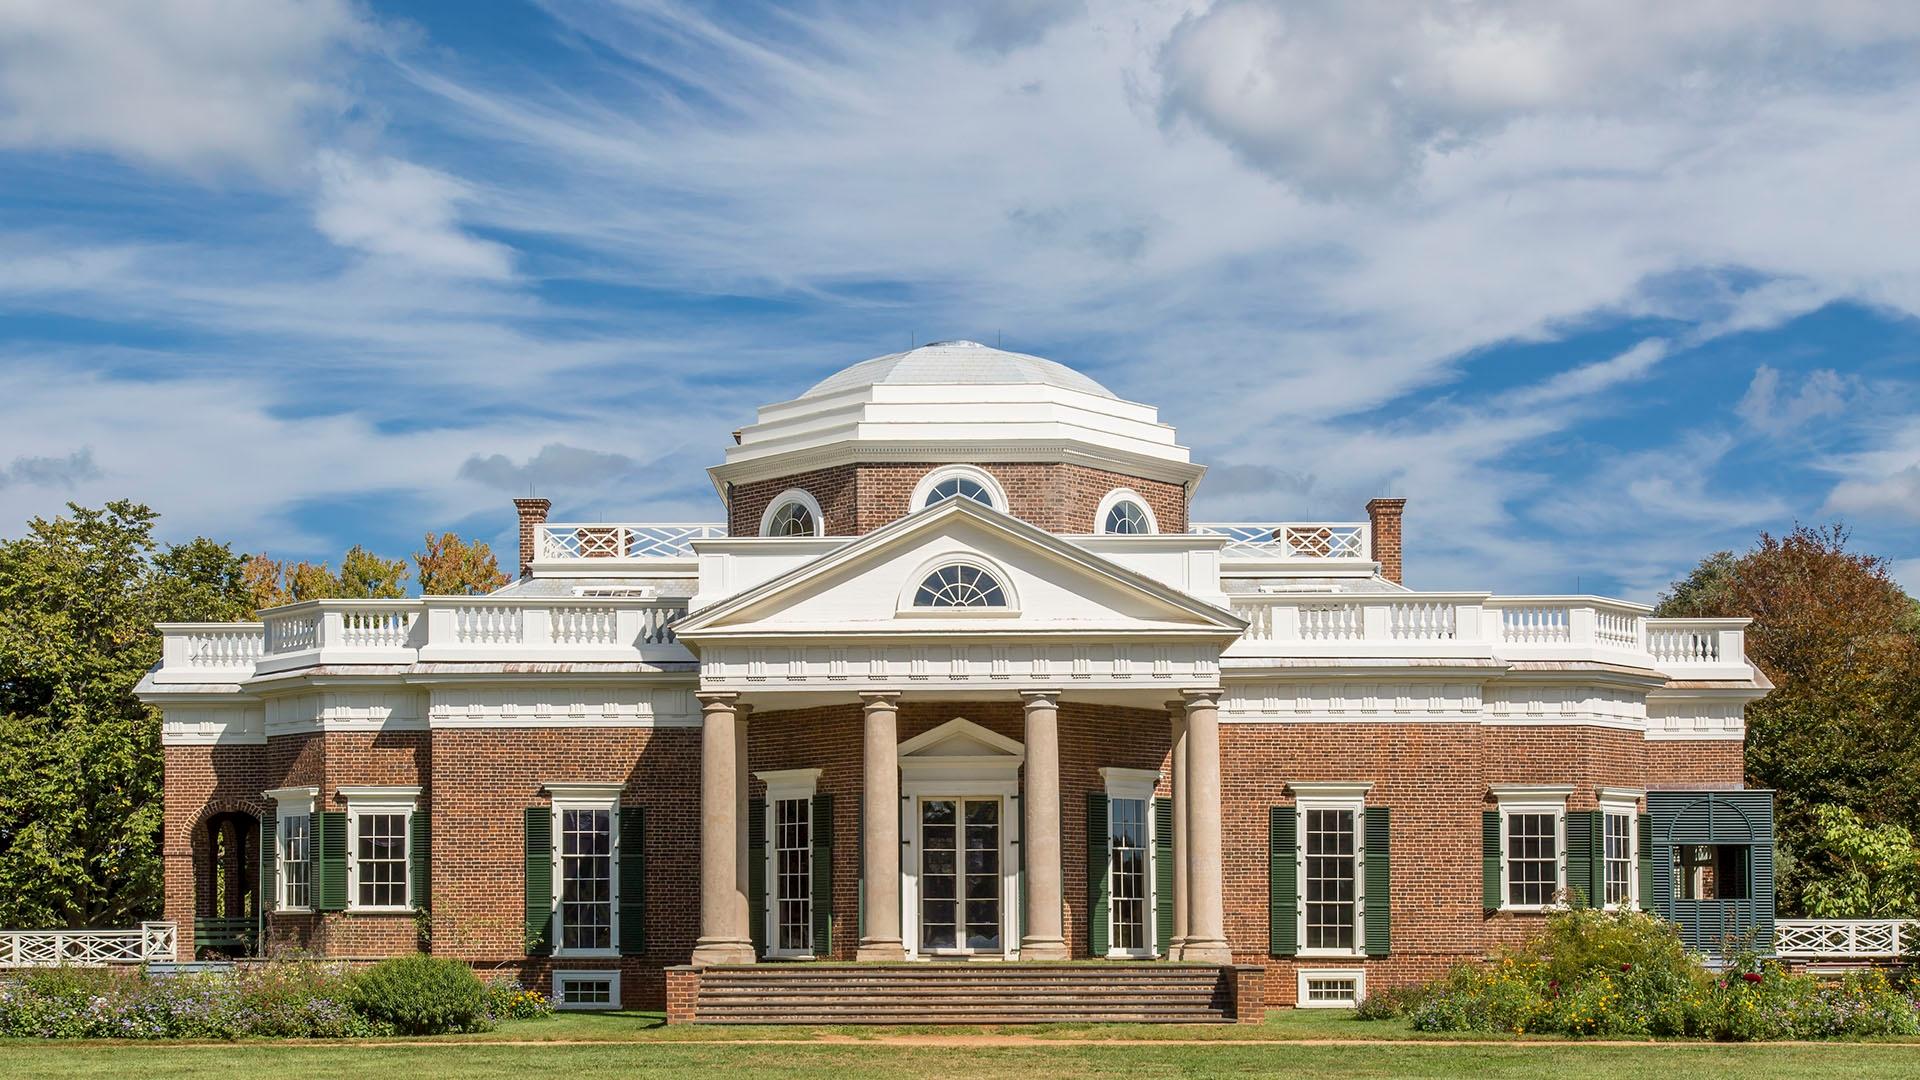 10 homes that changed America